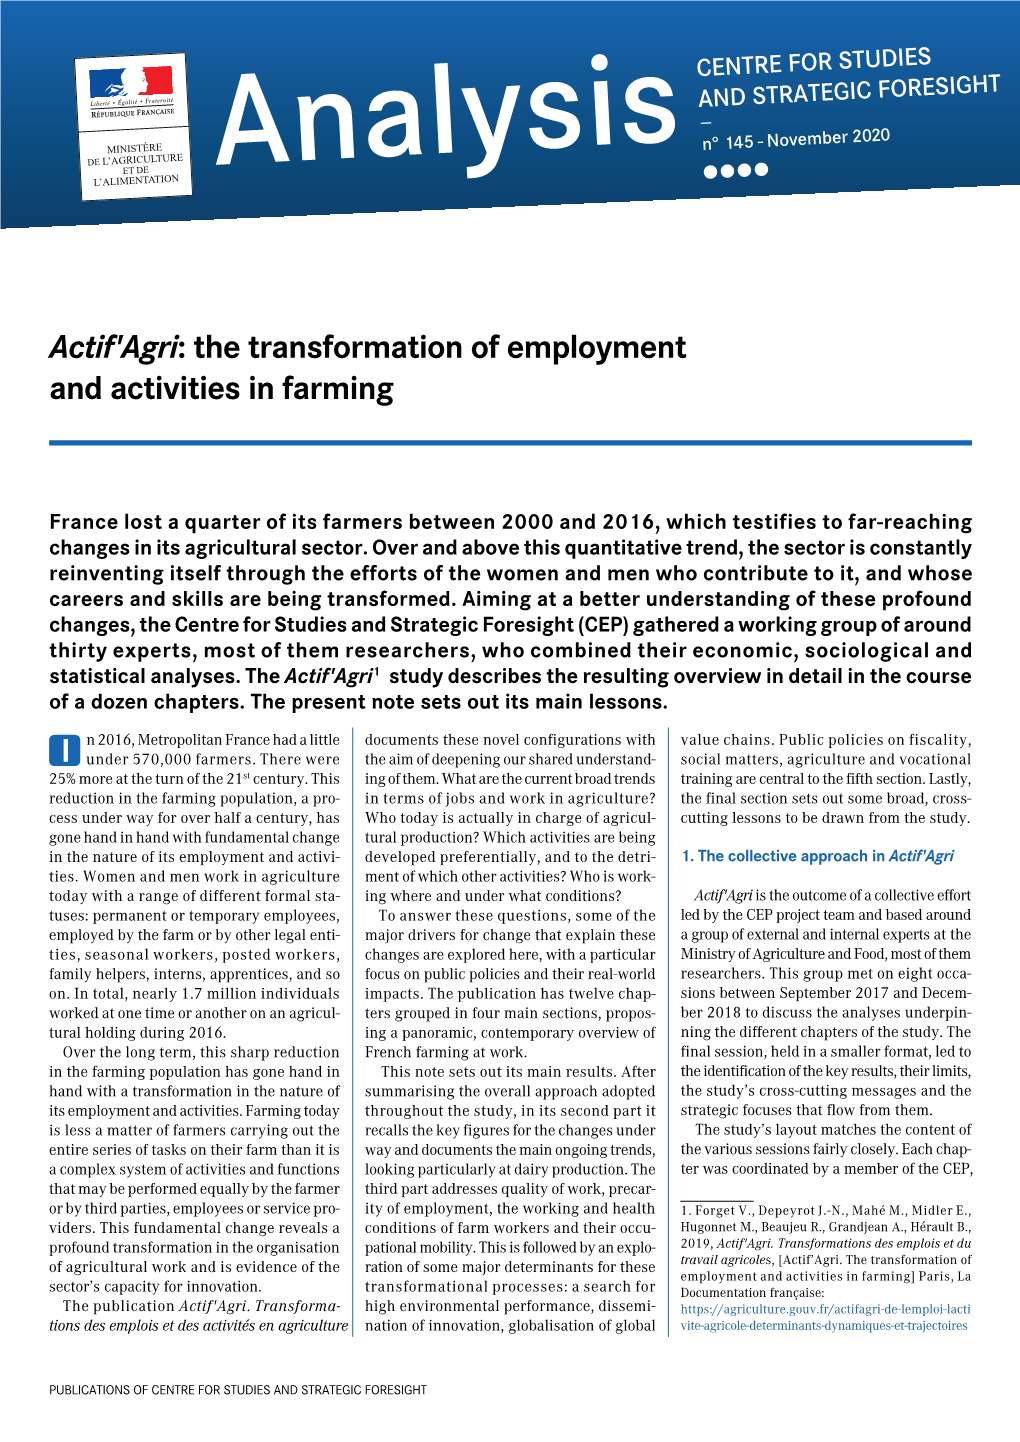 Actif'agri: the Transformation of Employment and Activities in Farming